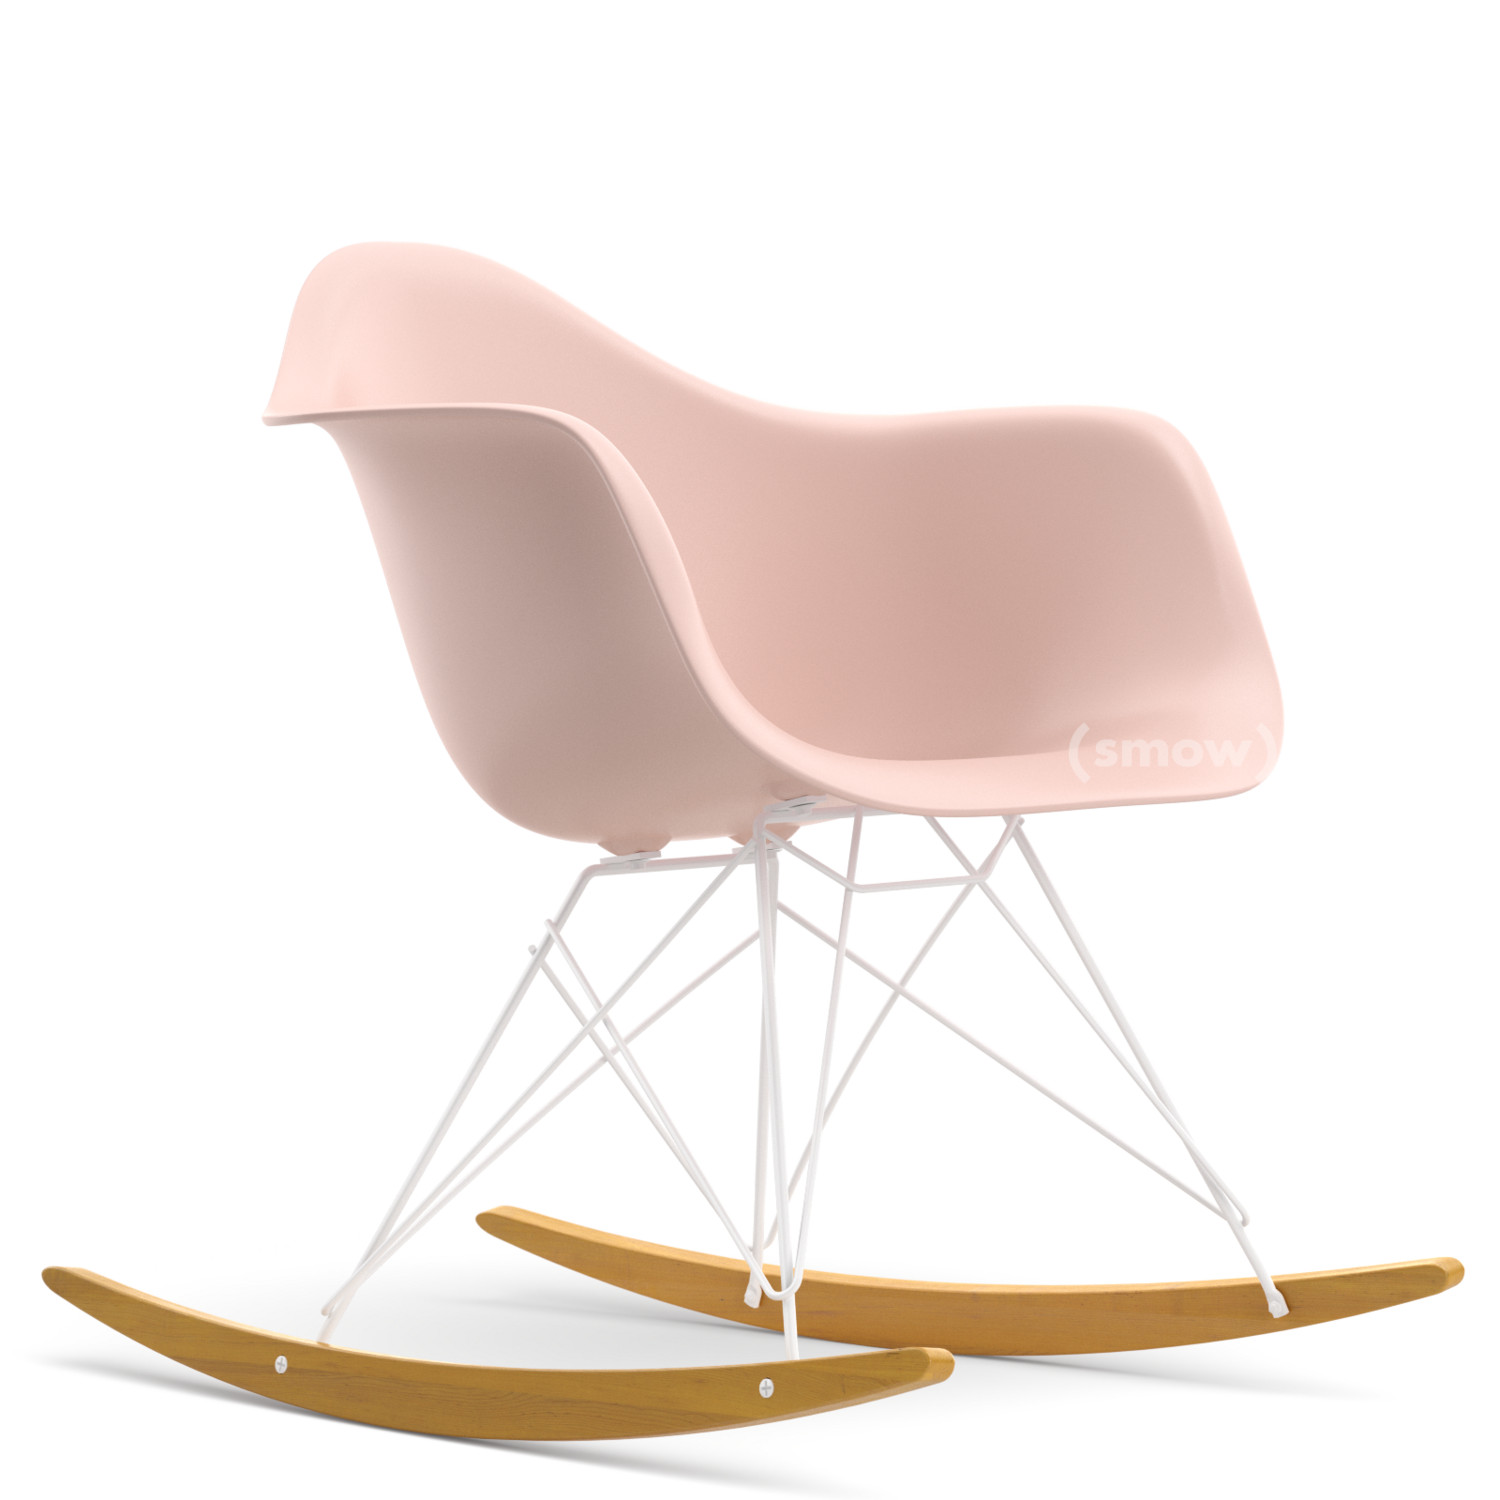 Vitra Eames Plastic Armchair Rar Pale Rose New Height Coated White Yellowish Maple By Charles Ray Eames 1950 Designer Furniture By Smow Com